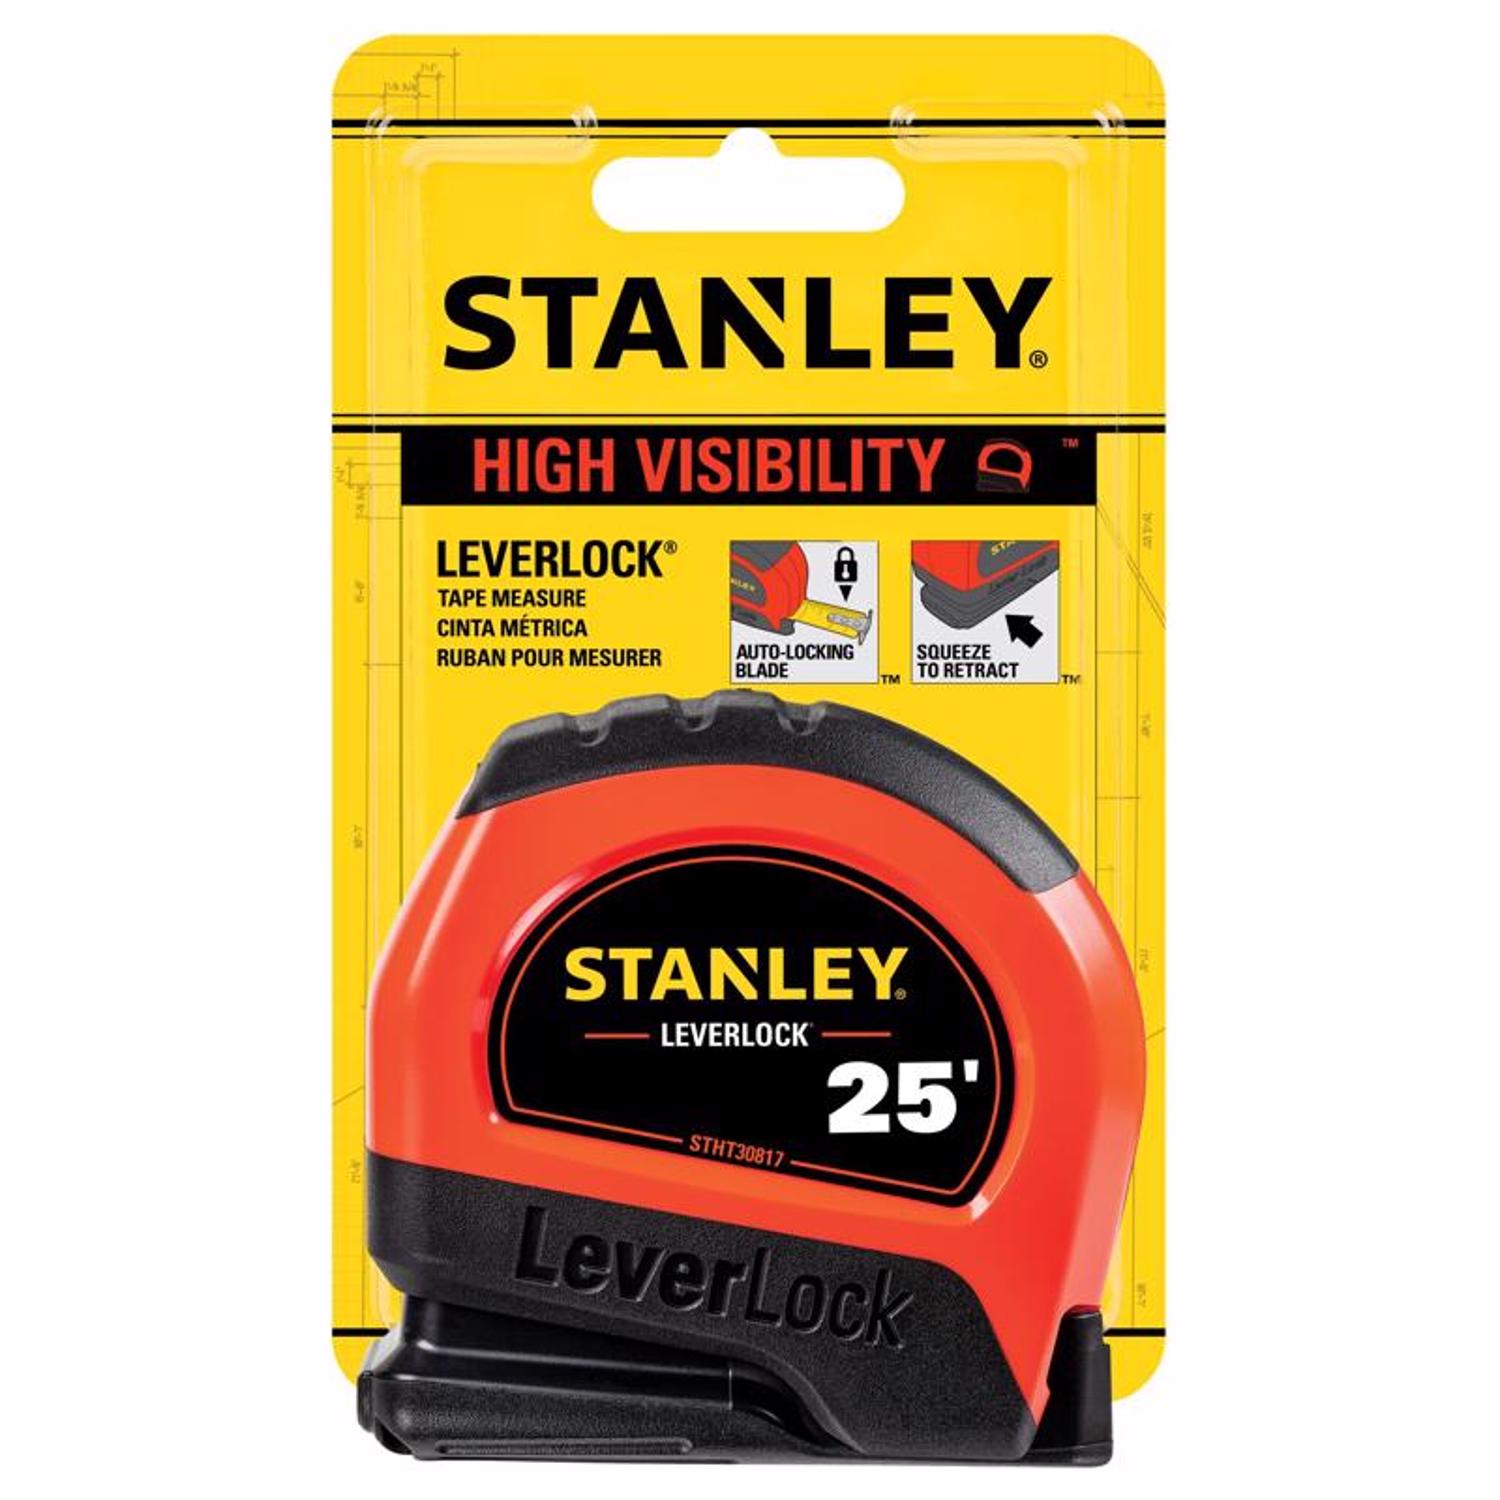 Photos - Tape Measure and Surveyor Tape Stanley LeverLock 25 ft. L X 1 in. W Tape Measure 1 pk STHT30817S 